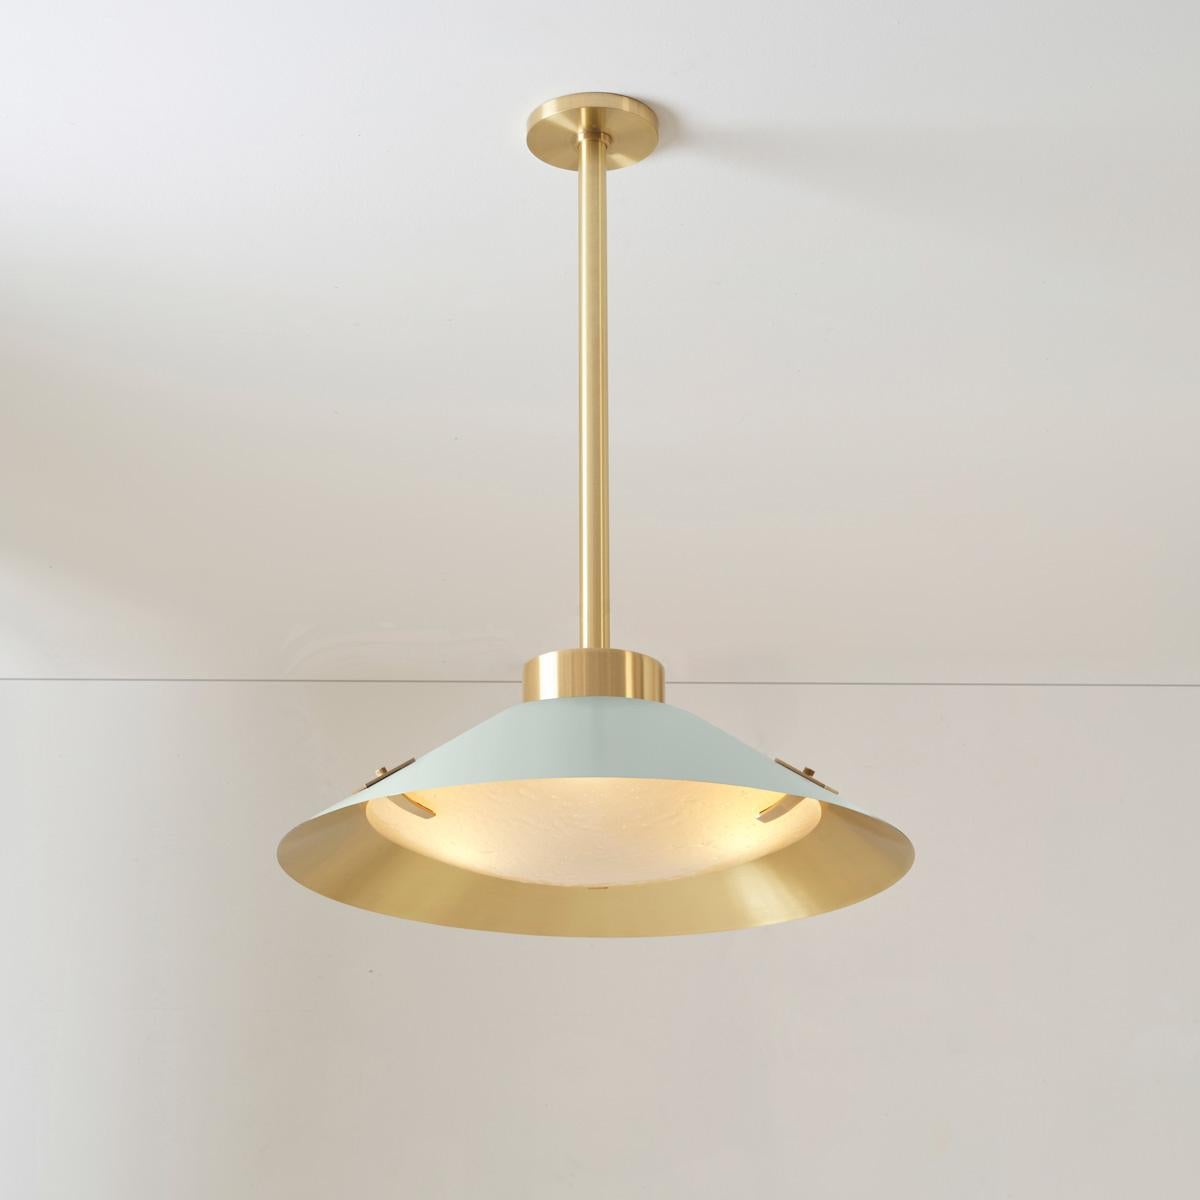 Contemporary Kono Pendant by Gaspare Asaro. Satin Brass and Sand White For Sale